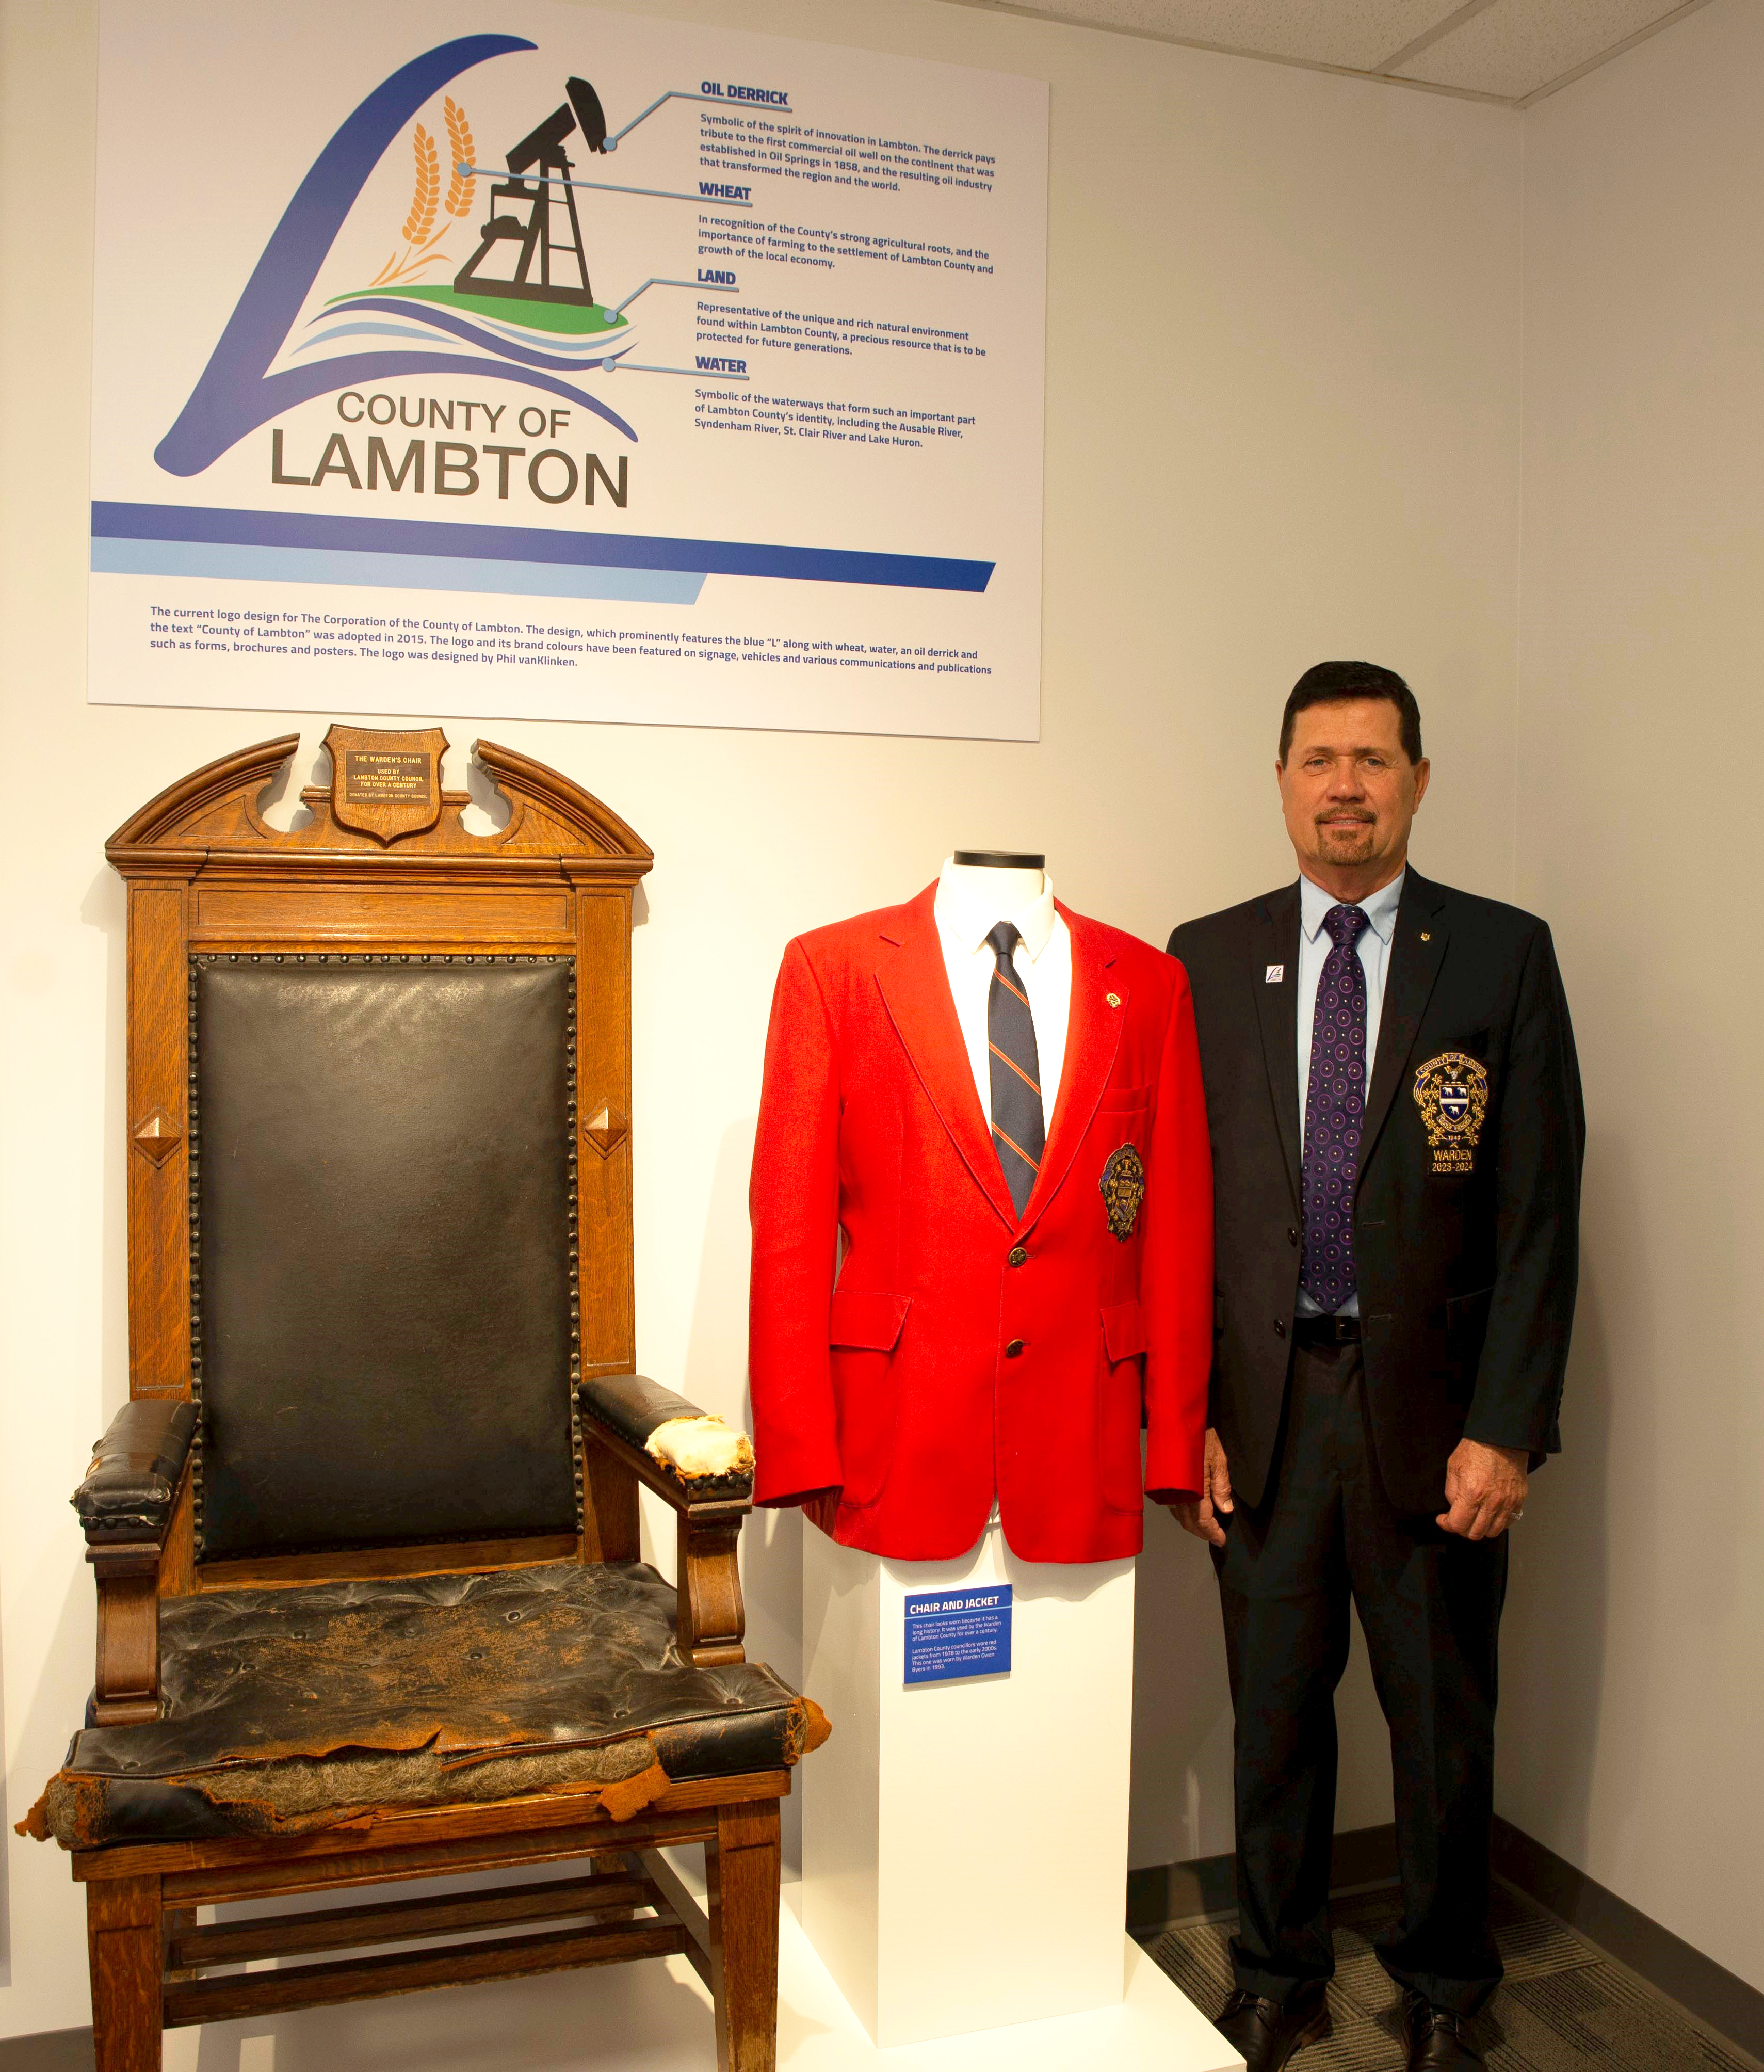 Warden Kevin Marriott posing next to the former Warden's Chair and Jacket